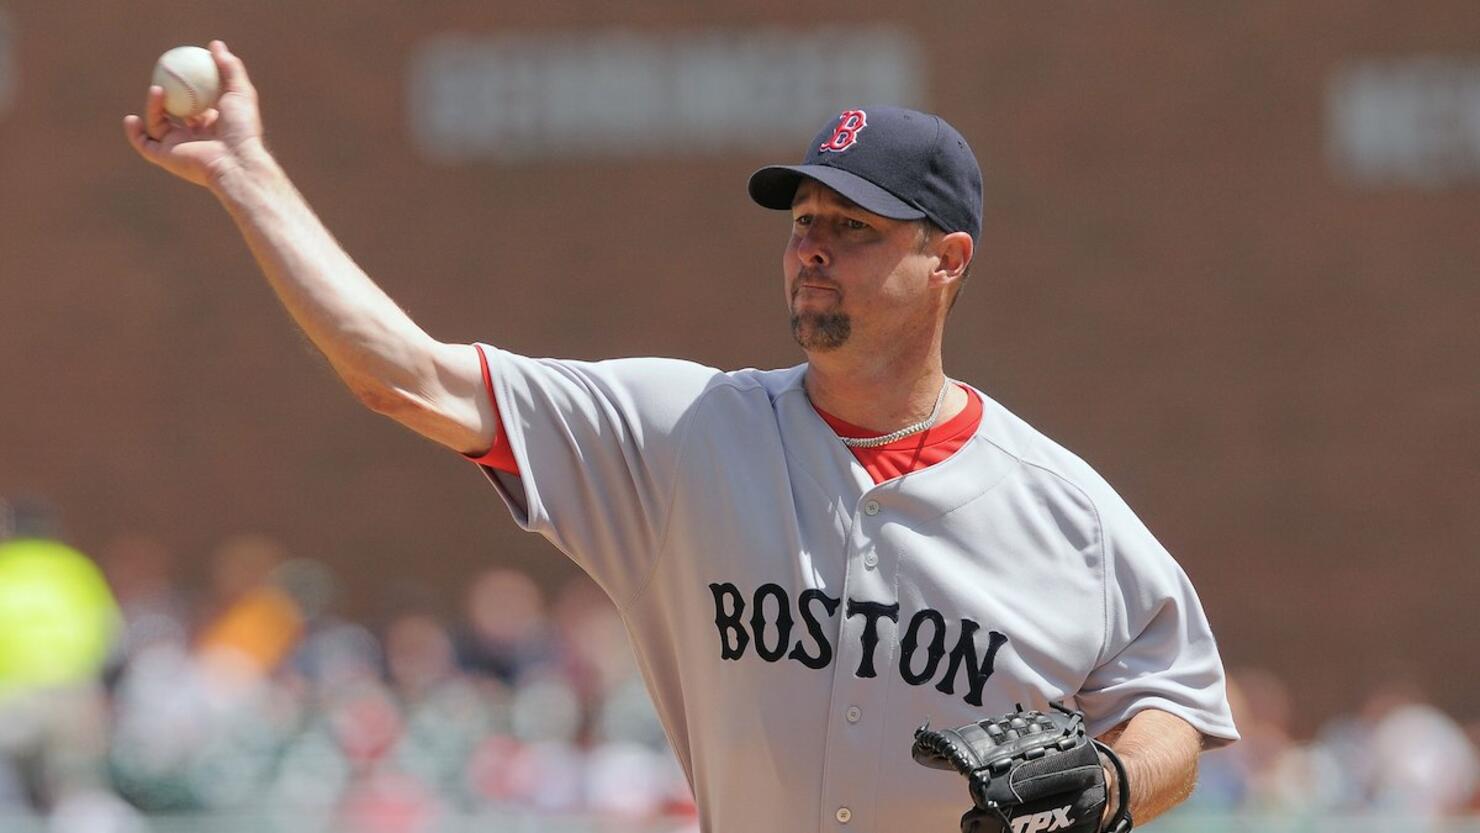 Tim Wakefield, former Boston Red Sox pitcher dies at age 57